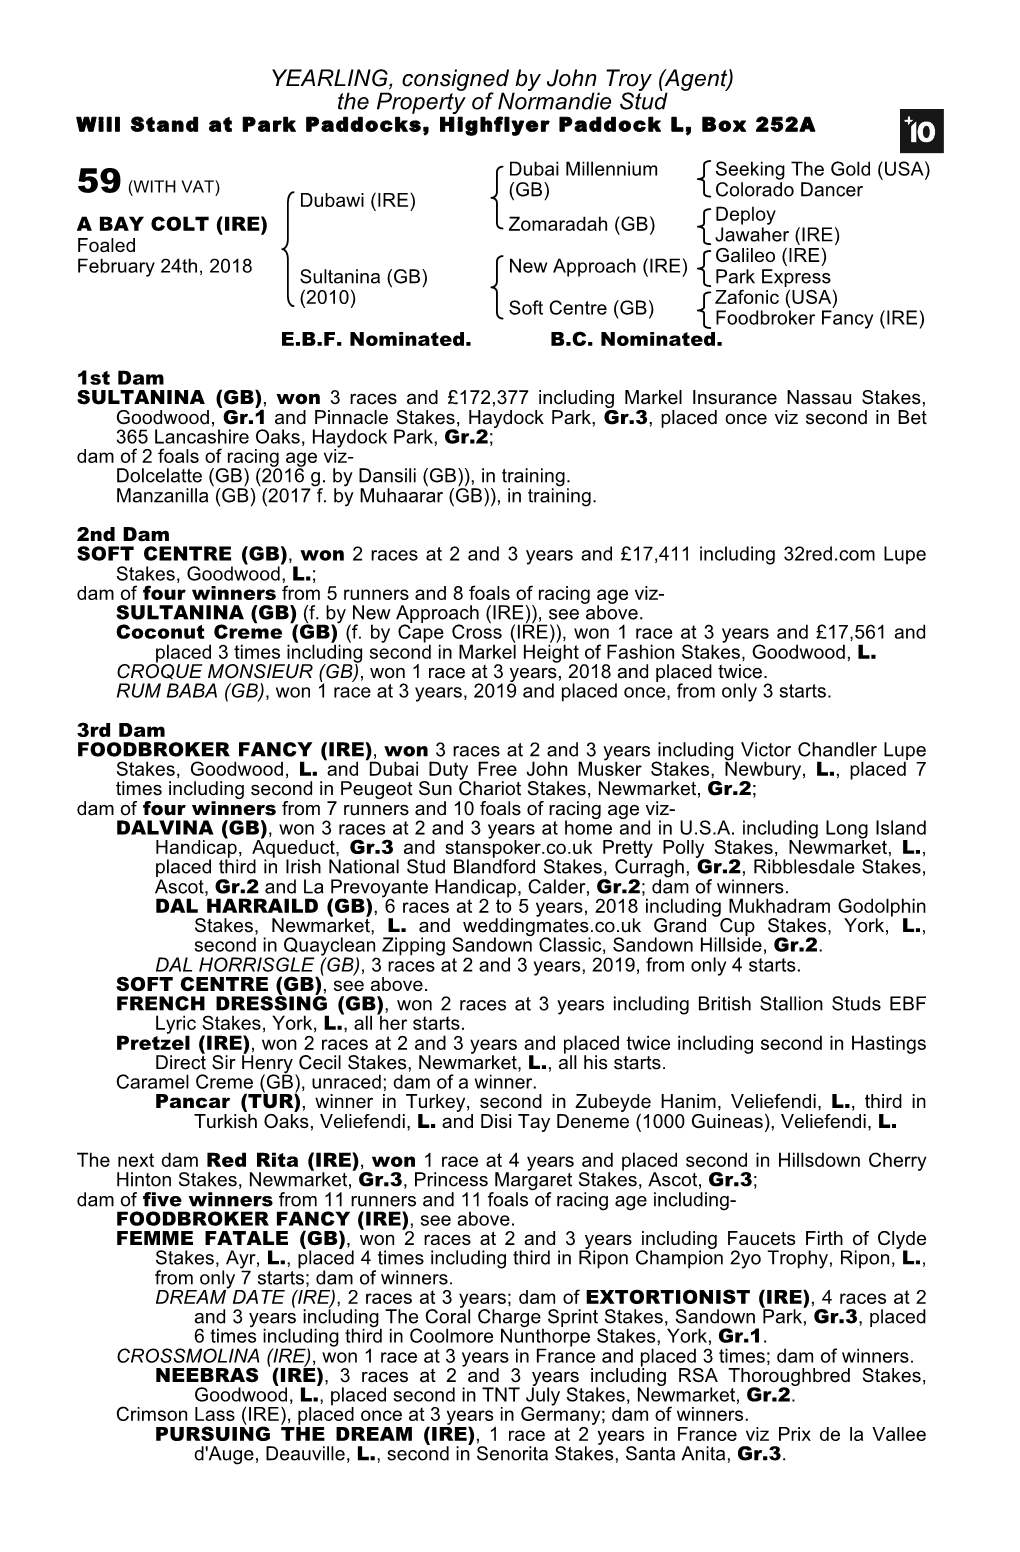 YEARLING, Consigned by John Troy (Agent) the Property of Normandie Stud Will Stand at Park Paddocks, Highflyer Paddock L, Box 252A